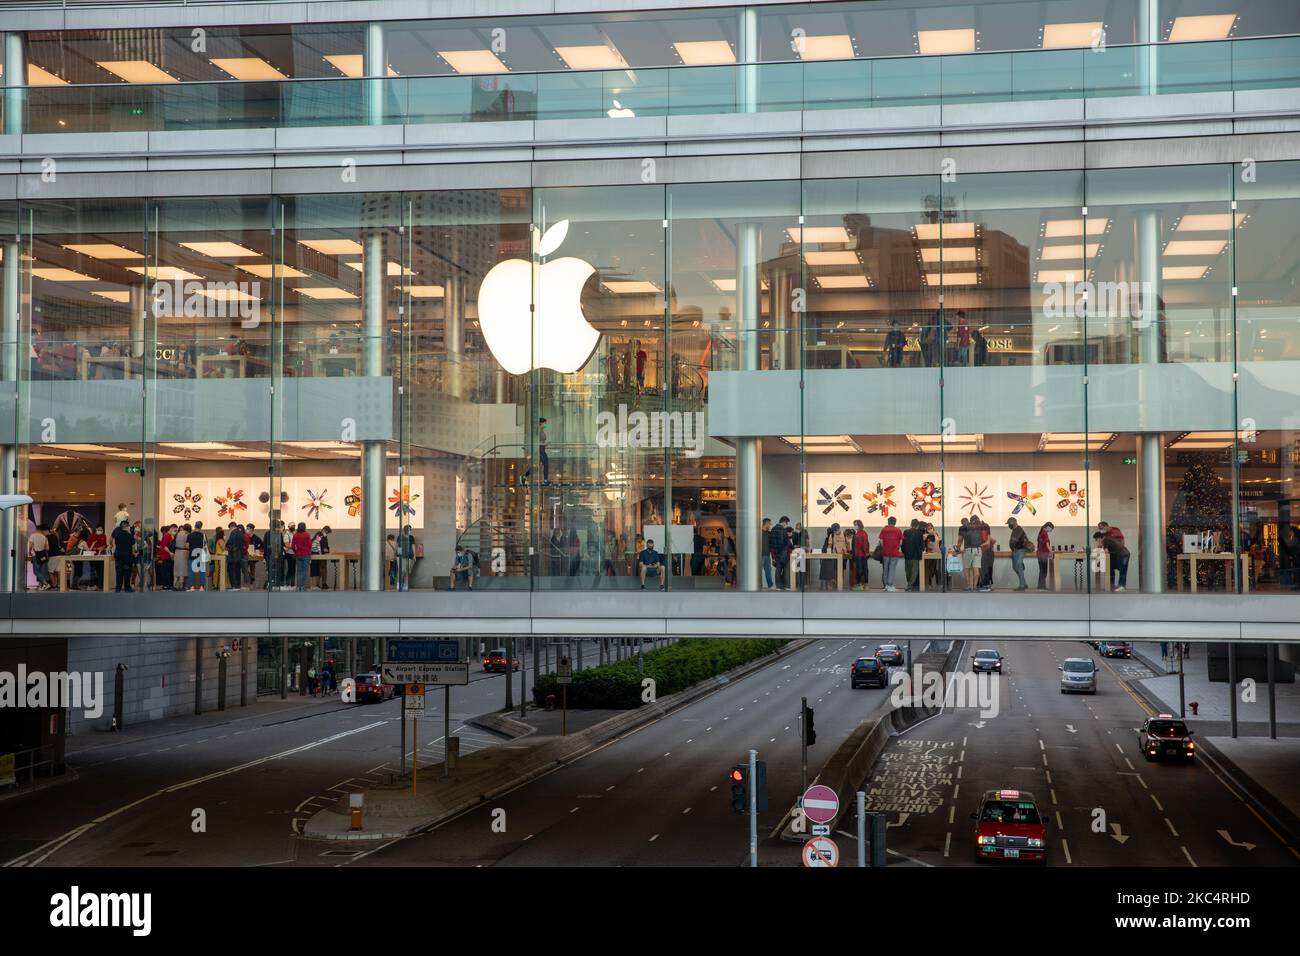 The Apple Store in the Internationa Finance Center in Central Hong Kong, China on Novemeber 22, 2020 after the launch of the new iPhone 12 range. (Photo by Simon Jankowski/NurPhoto) Stock Photo